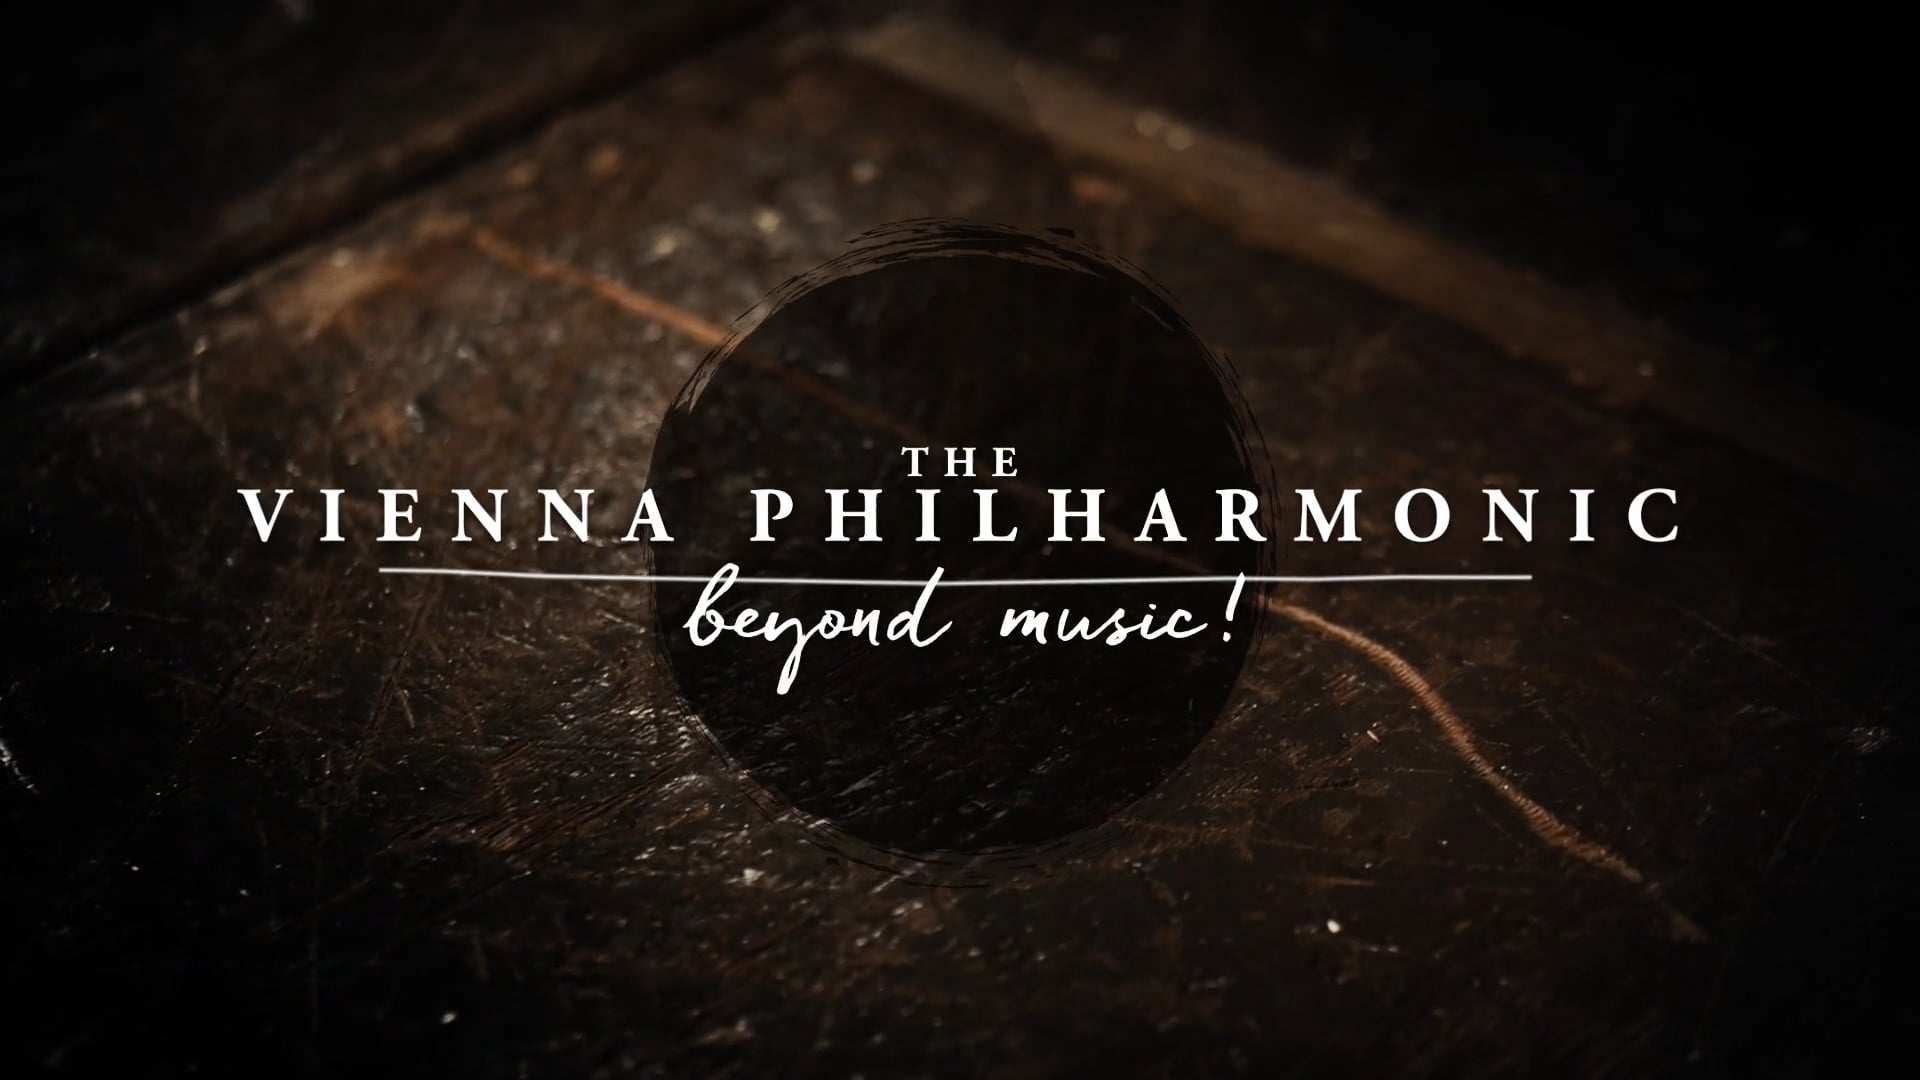 The Vienna Philharmonic - Beyond Music! (Official Trailer)